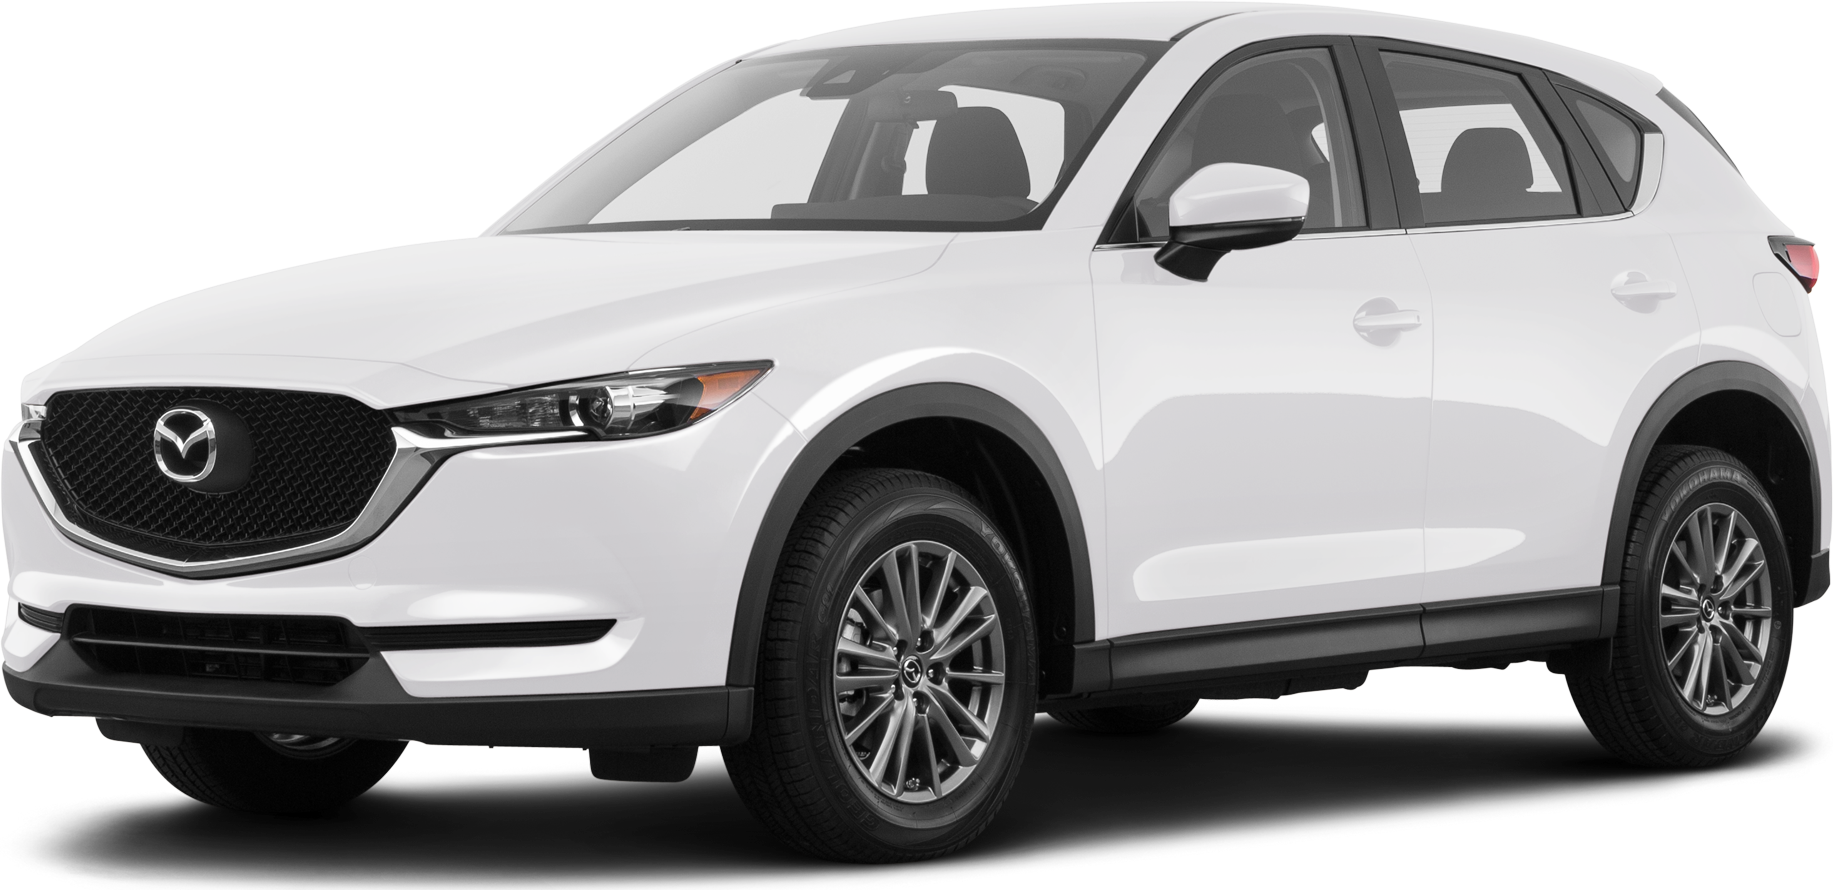 2020 Mazda Cx 5 Prices Reviews Pictures Kelley Blue Book